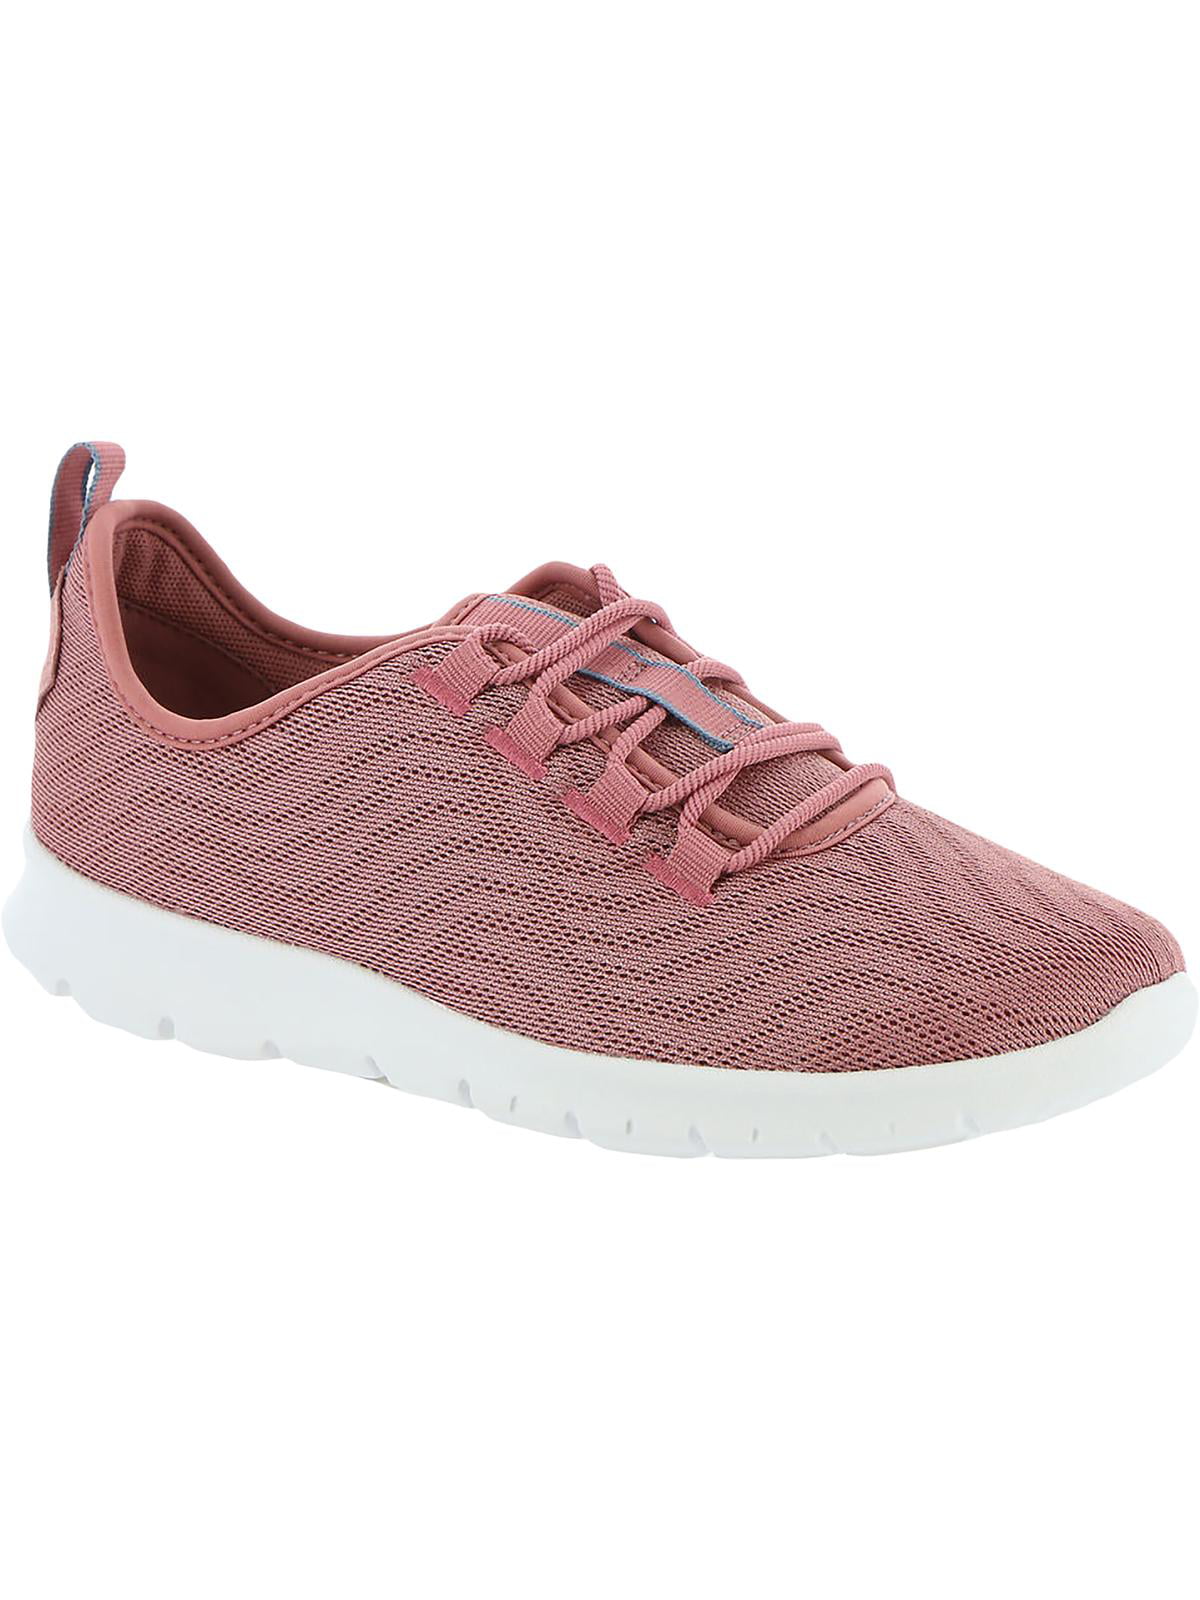 Women's Shoes Clarks Tri Amelia Casual Athletic Sneakers 31094 Pink Combi *New*